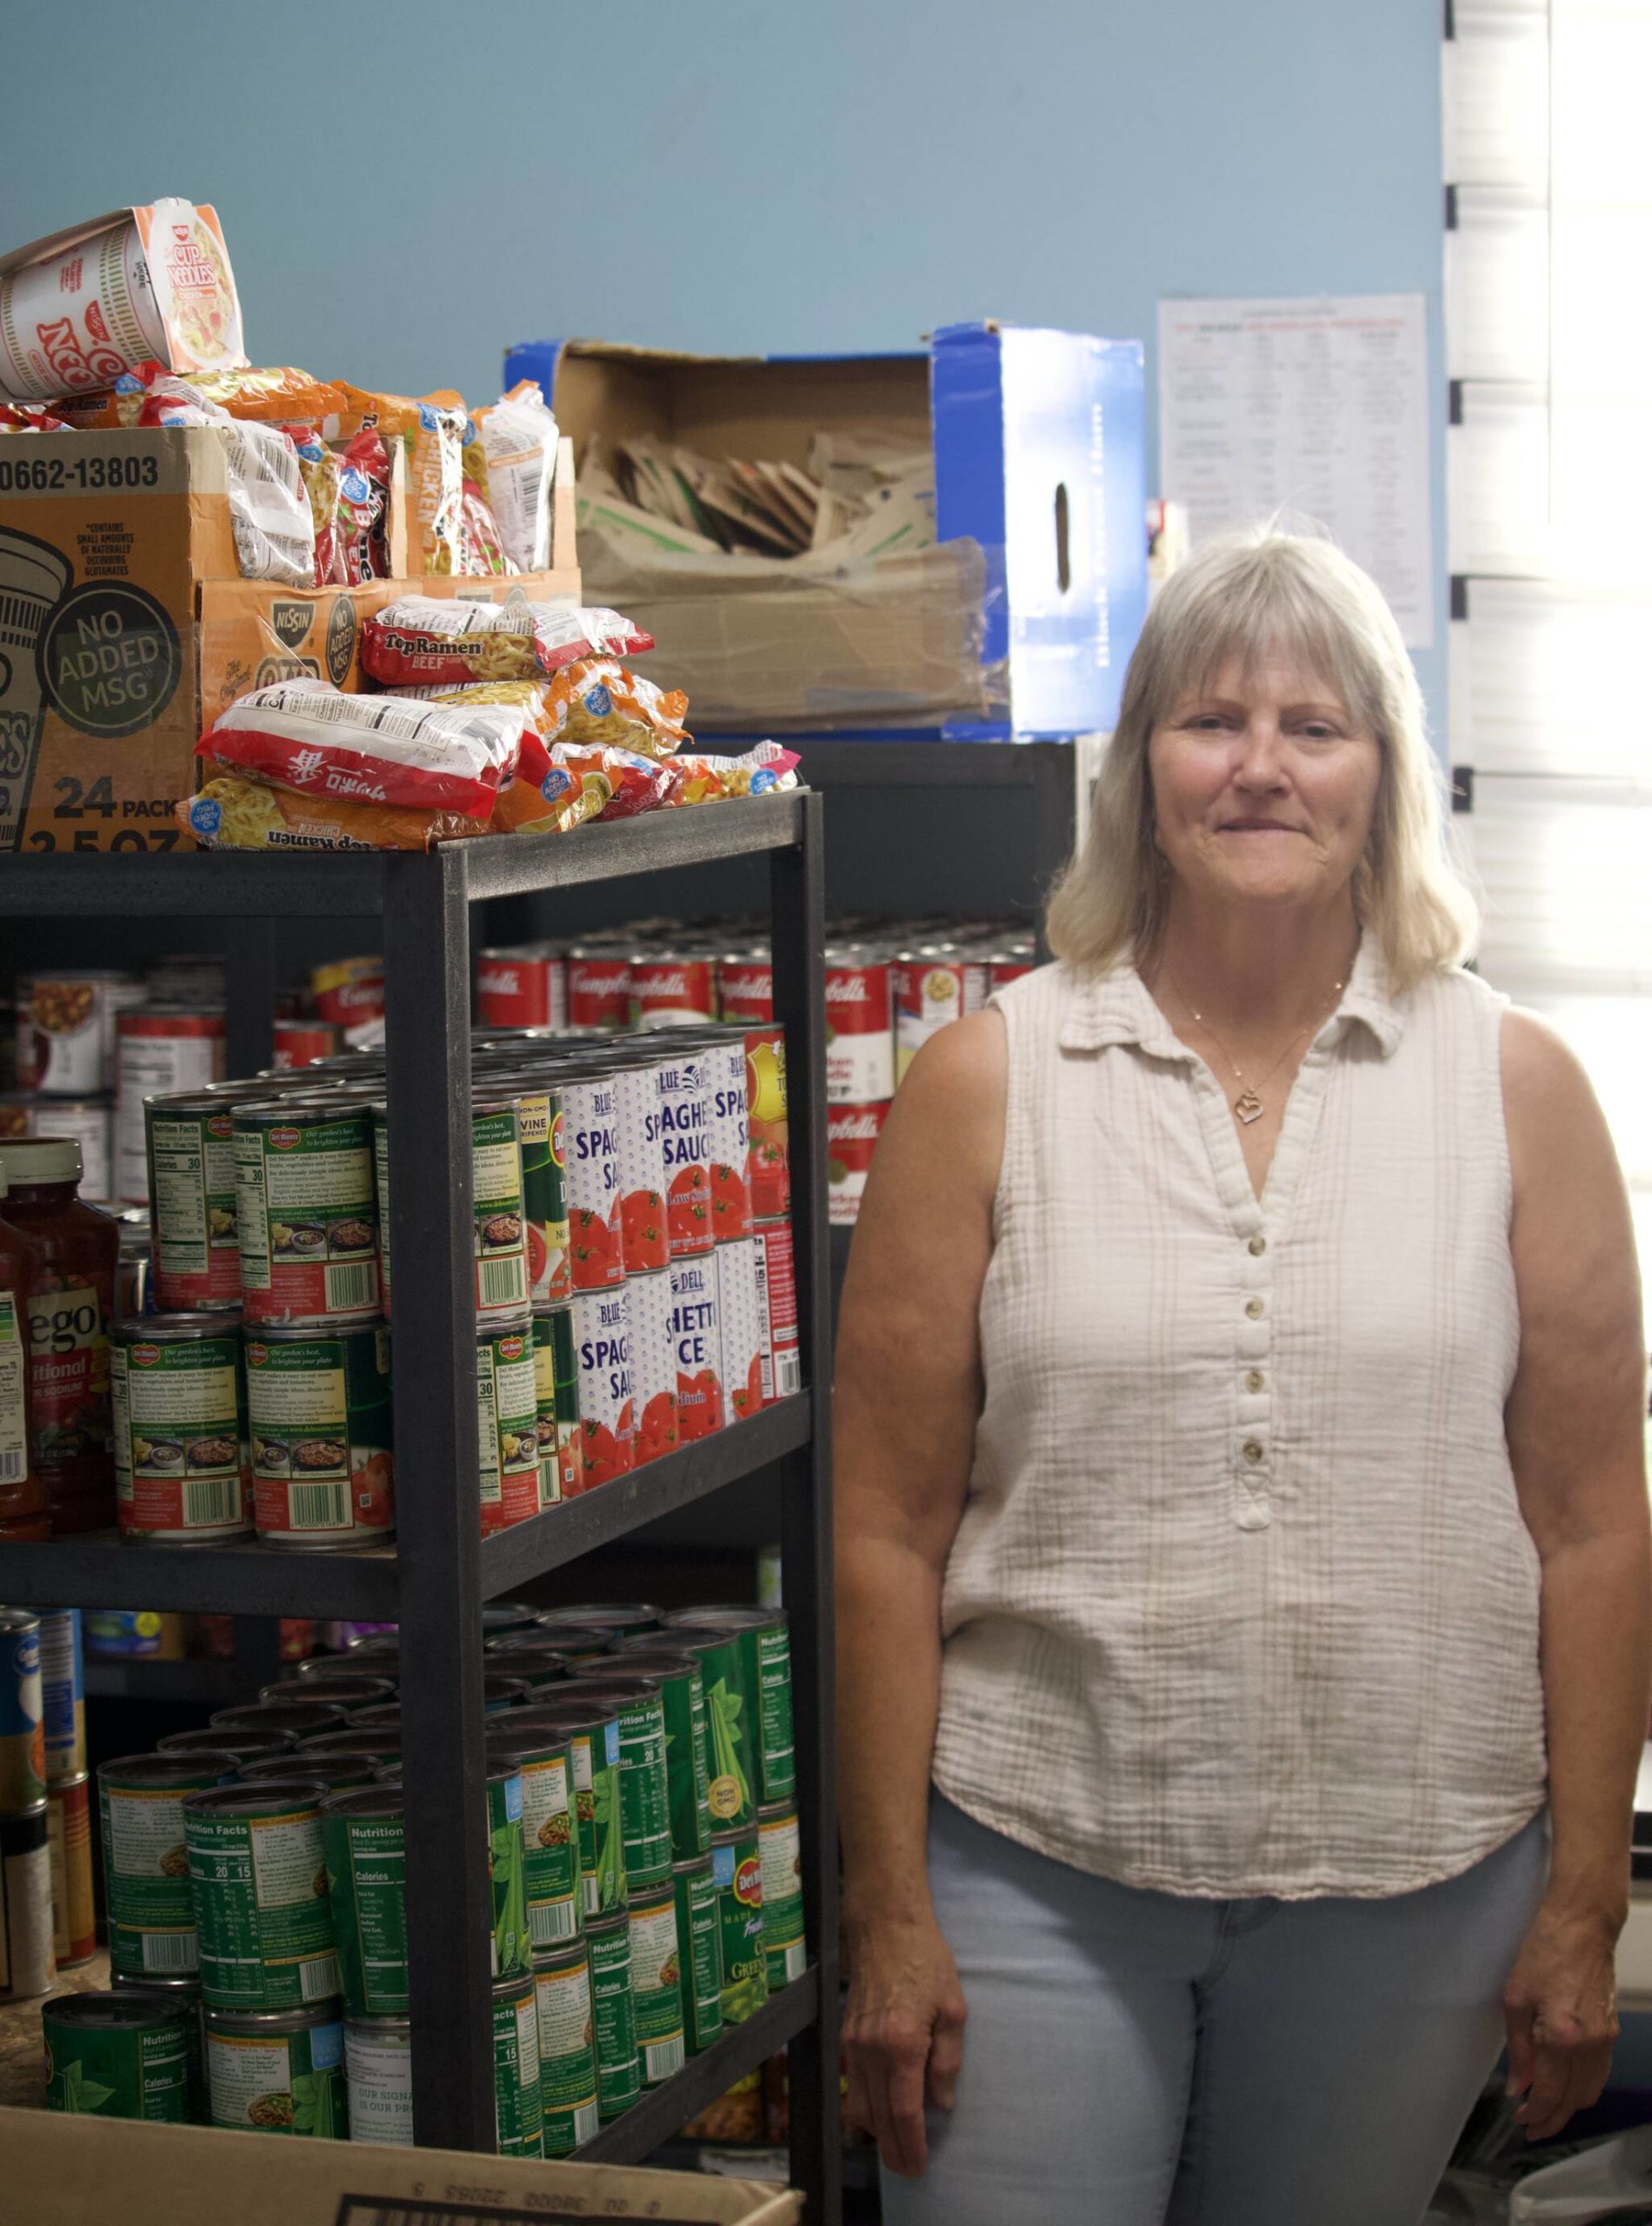 Photo by Rachel Rosen/Whidbey/News-Times
Jean Wieman in the North Whidbey Help House Food Pantry.